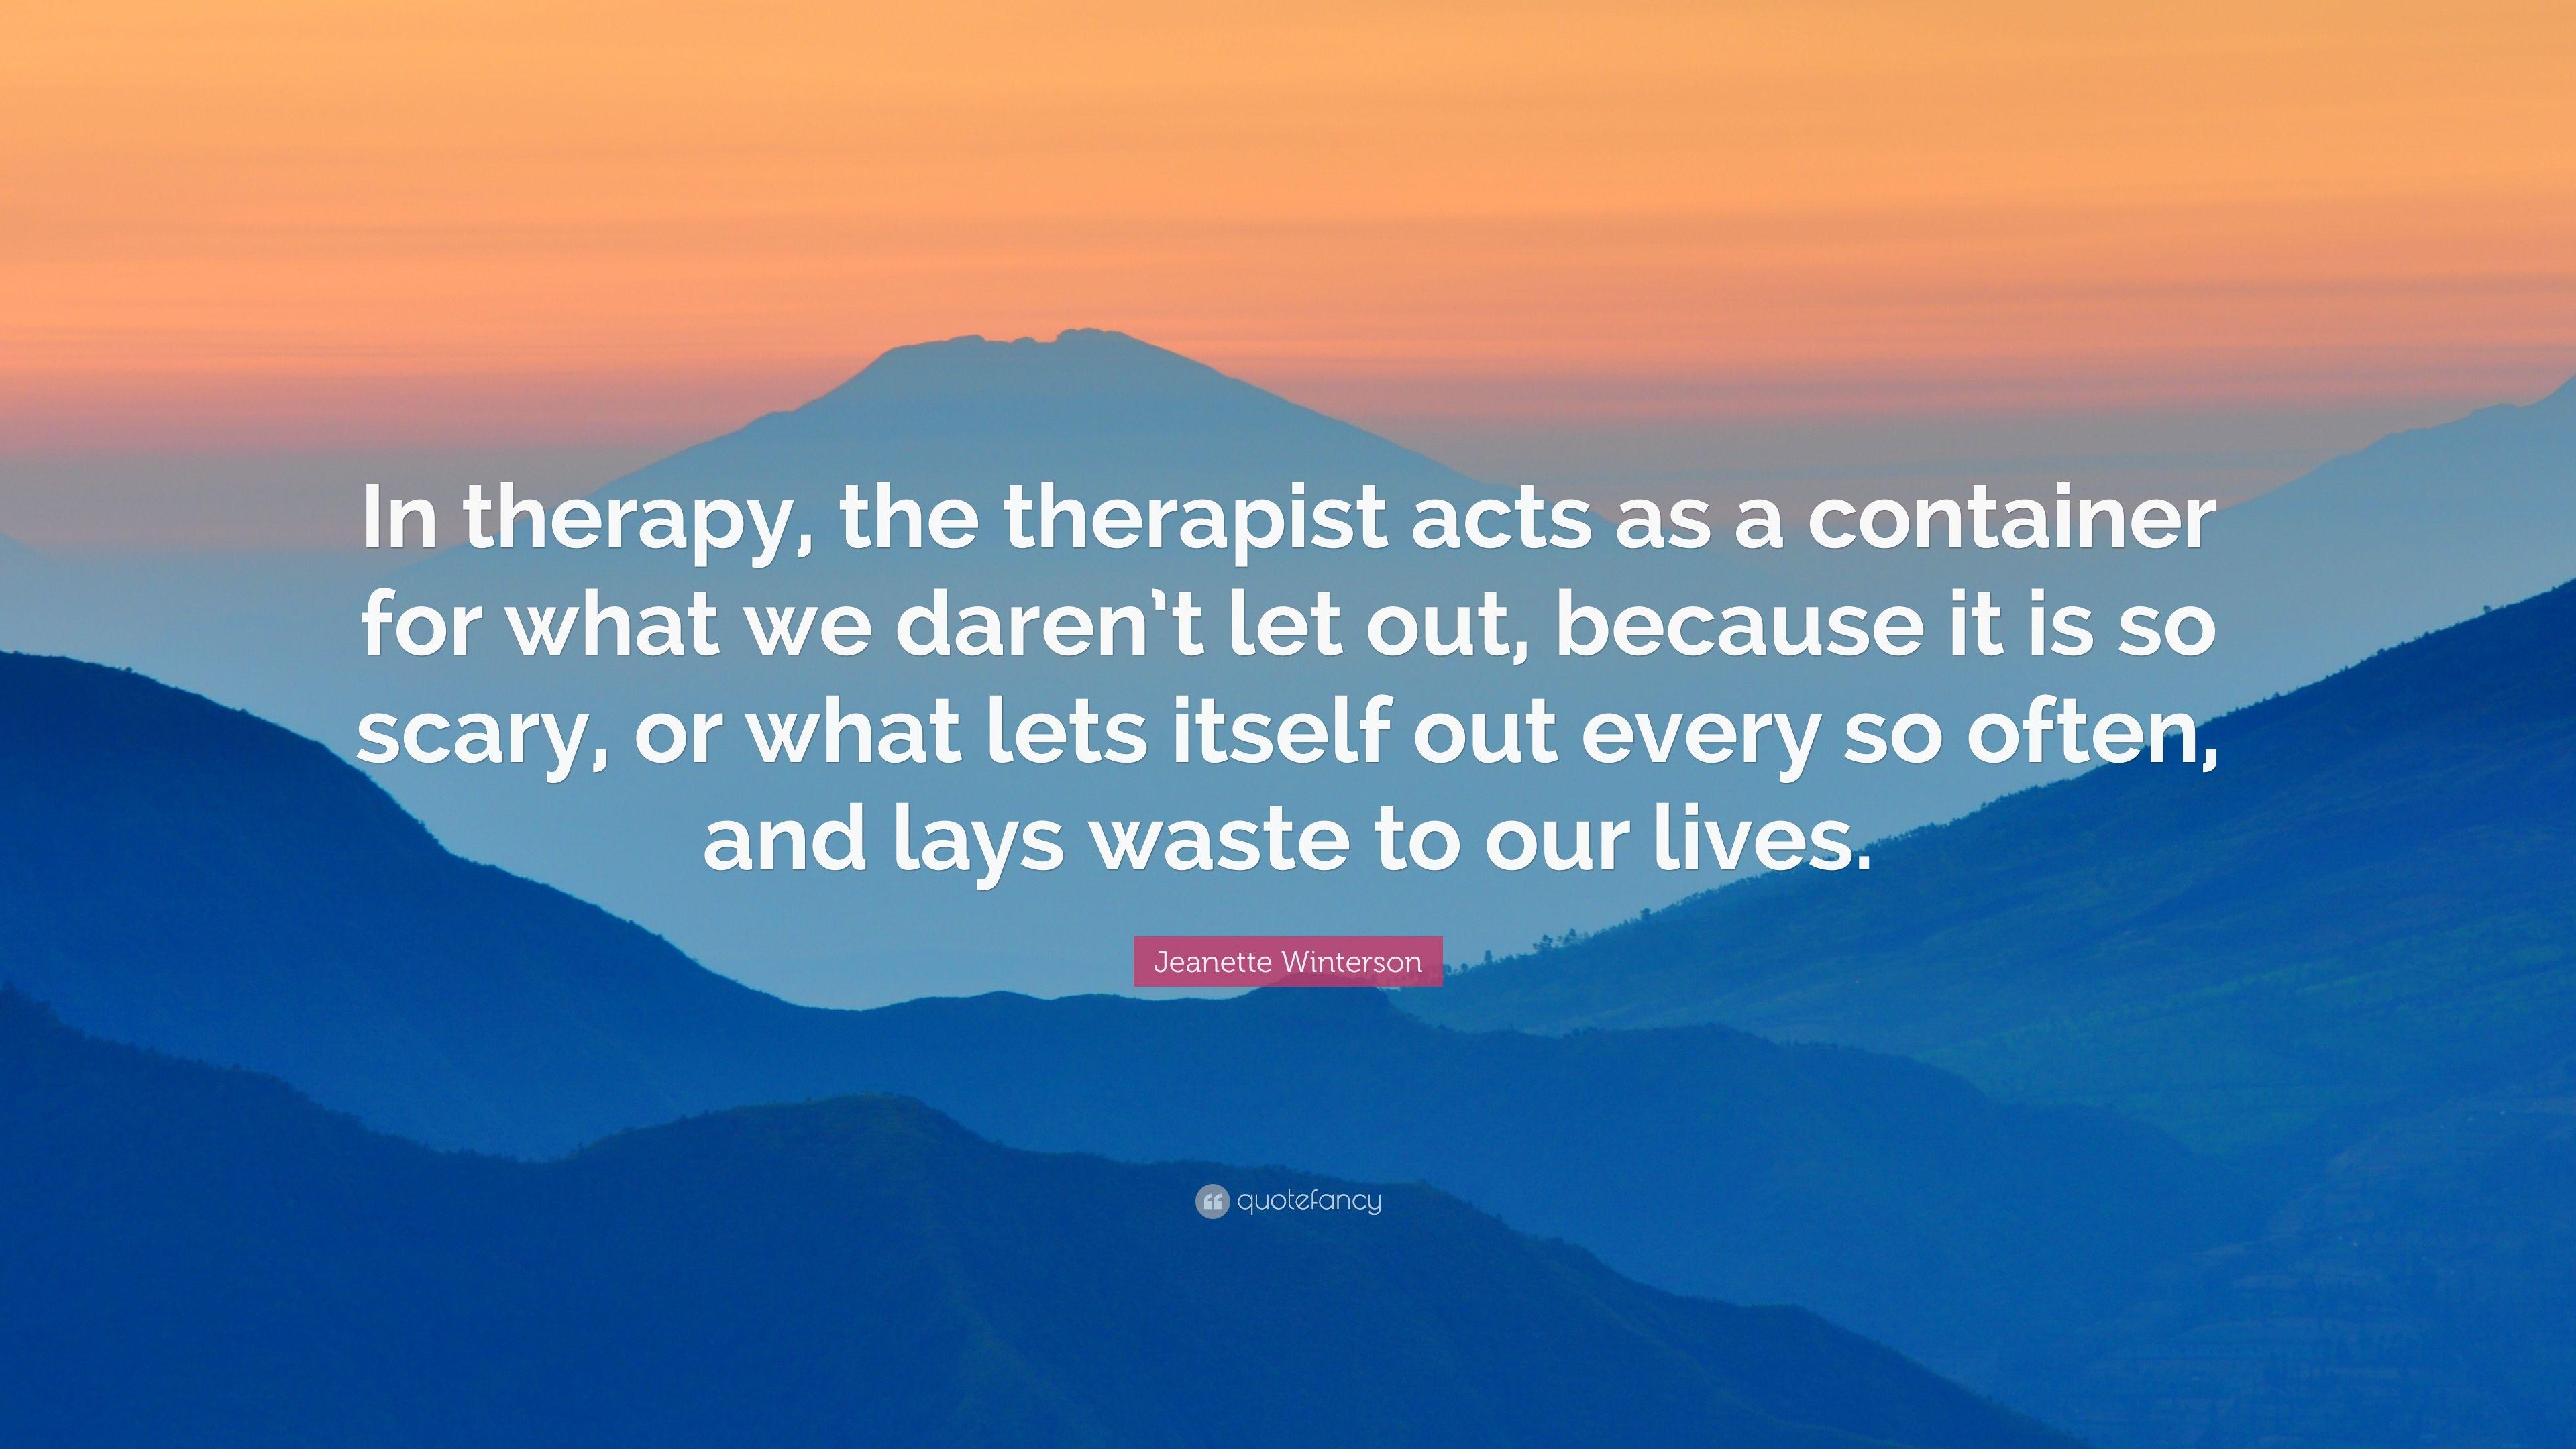 Jeanette Winterson Quote: “In therapy, the therapist acts as a container for what we daren't let out, because it is so scary, or what lets itself o.”